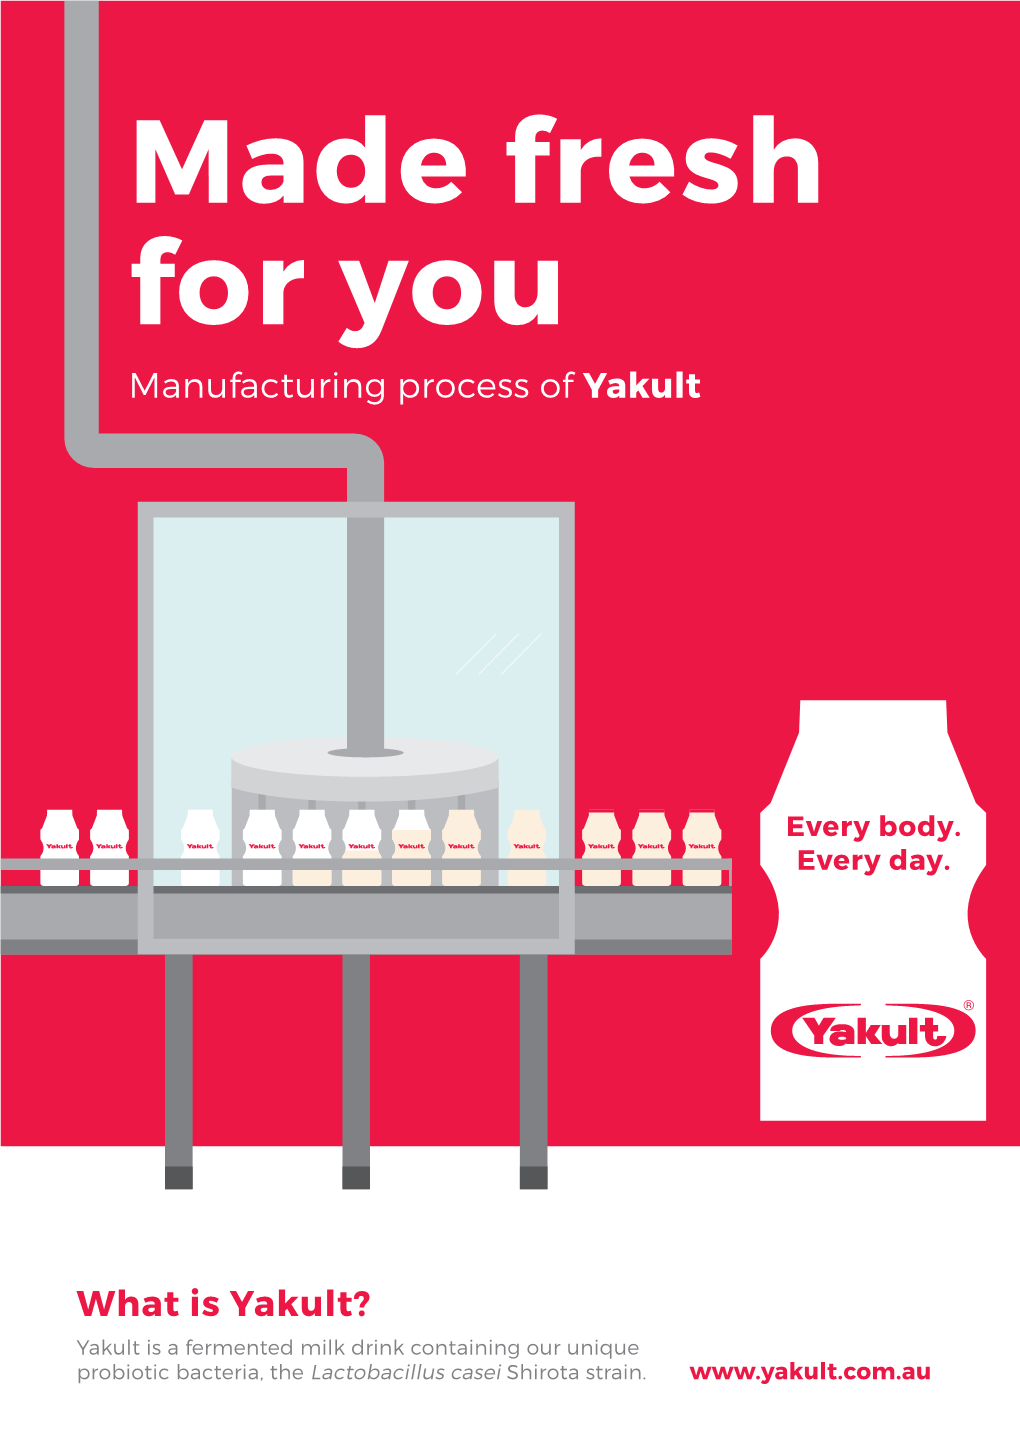 What Is Yakult? Yakult Is a Fermented Milk Drink Containing Our Unique Probiotic Bacteria, the Lactobacillus Casei Shirota Strain